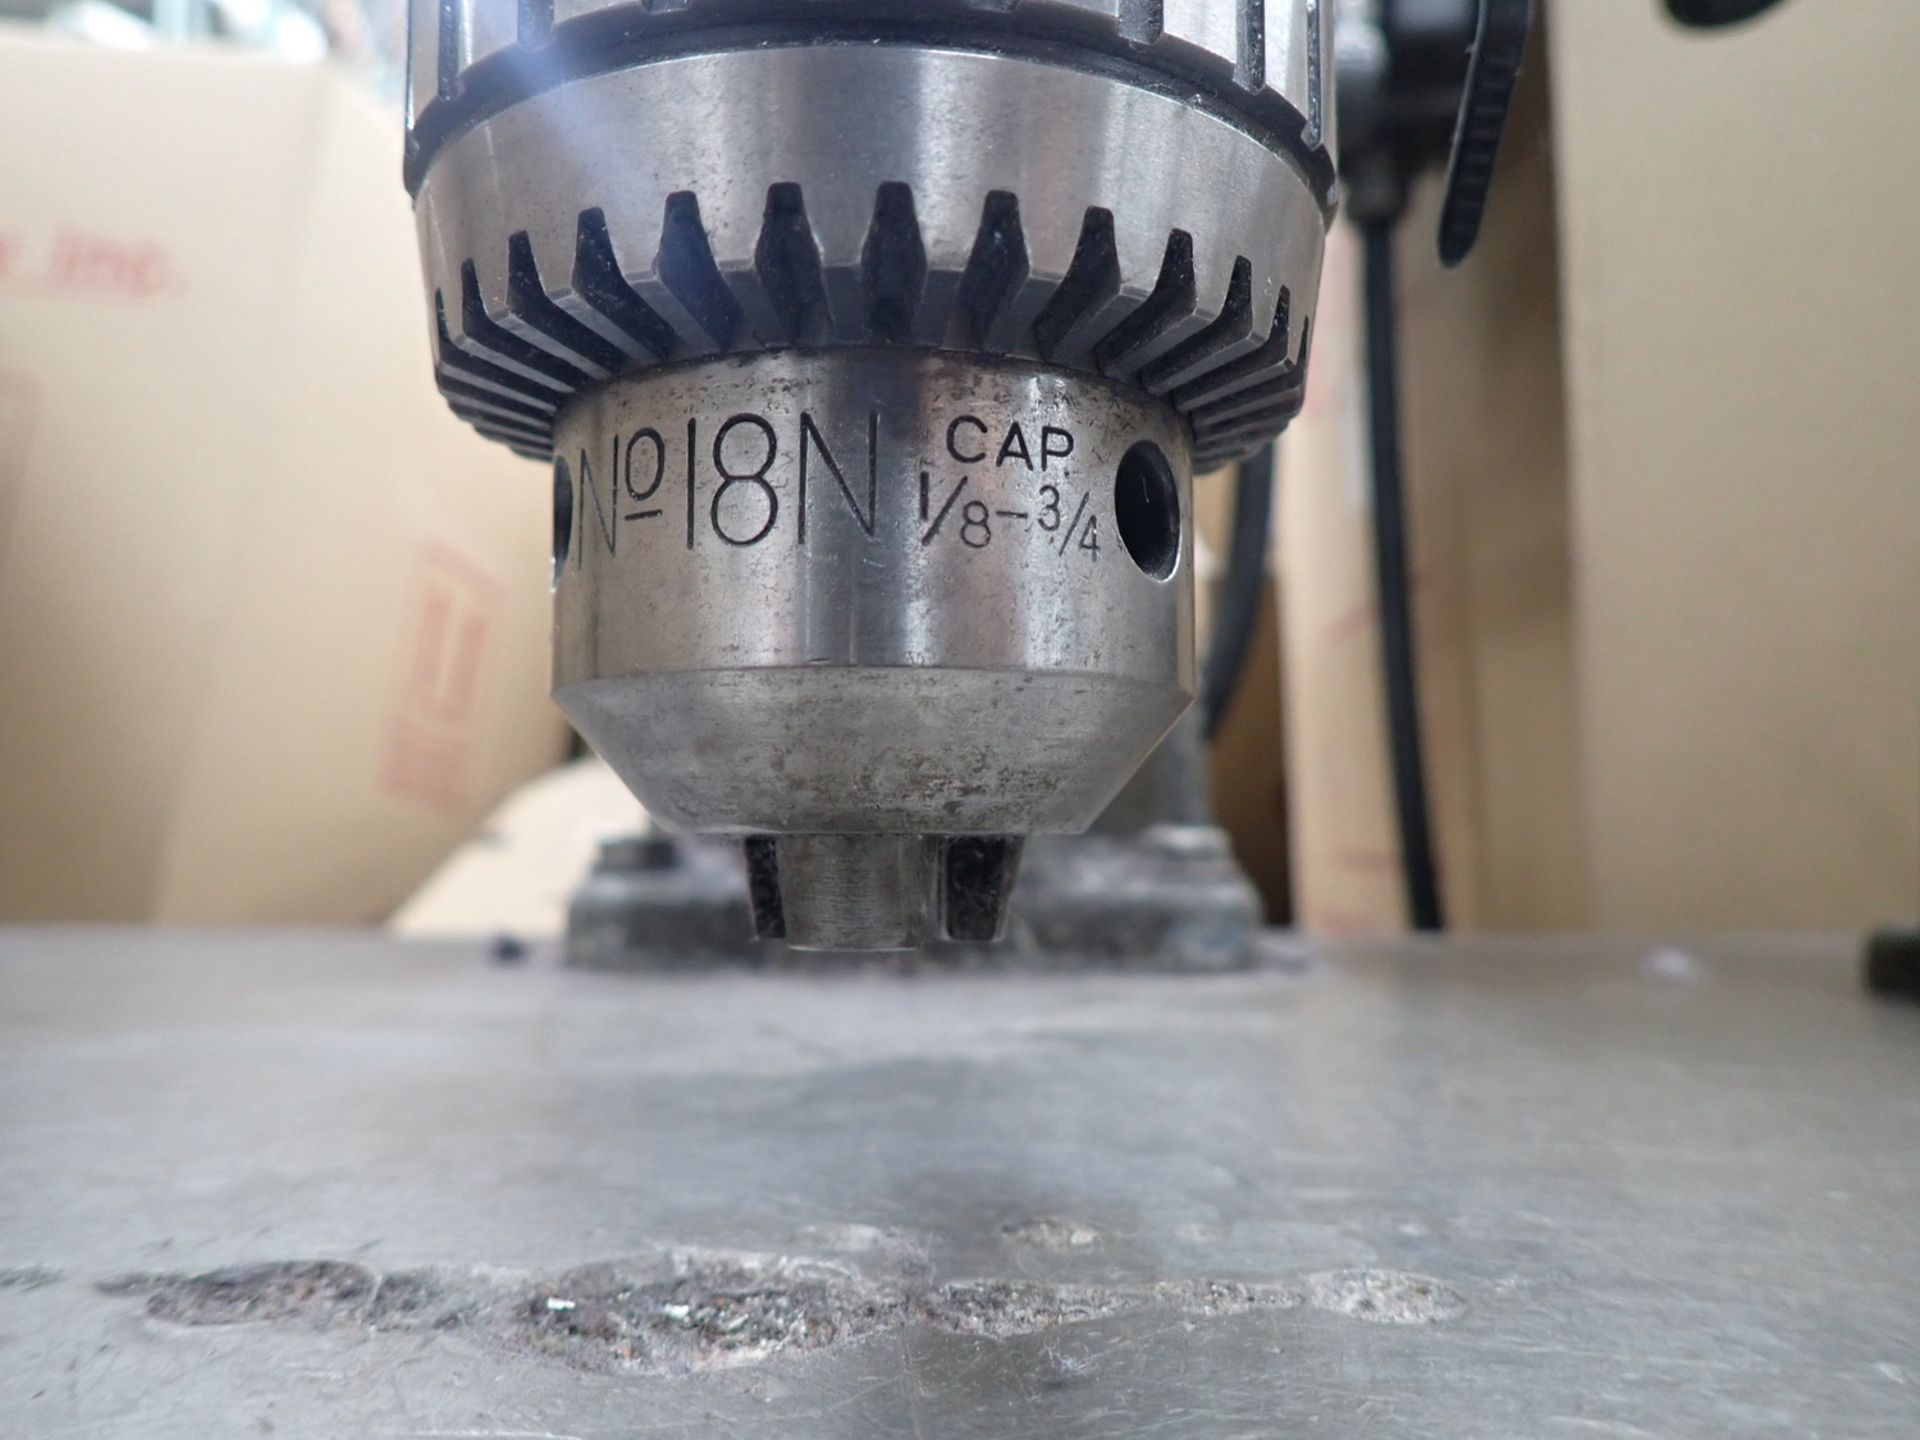 CANADIAN BLOWER 1/ 8 - 3/ 4" TABLE TOP DRILL PRESS W/ TABLE & VISES - Image 2 of 4